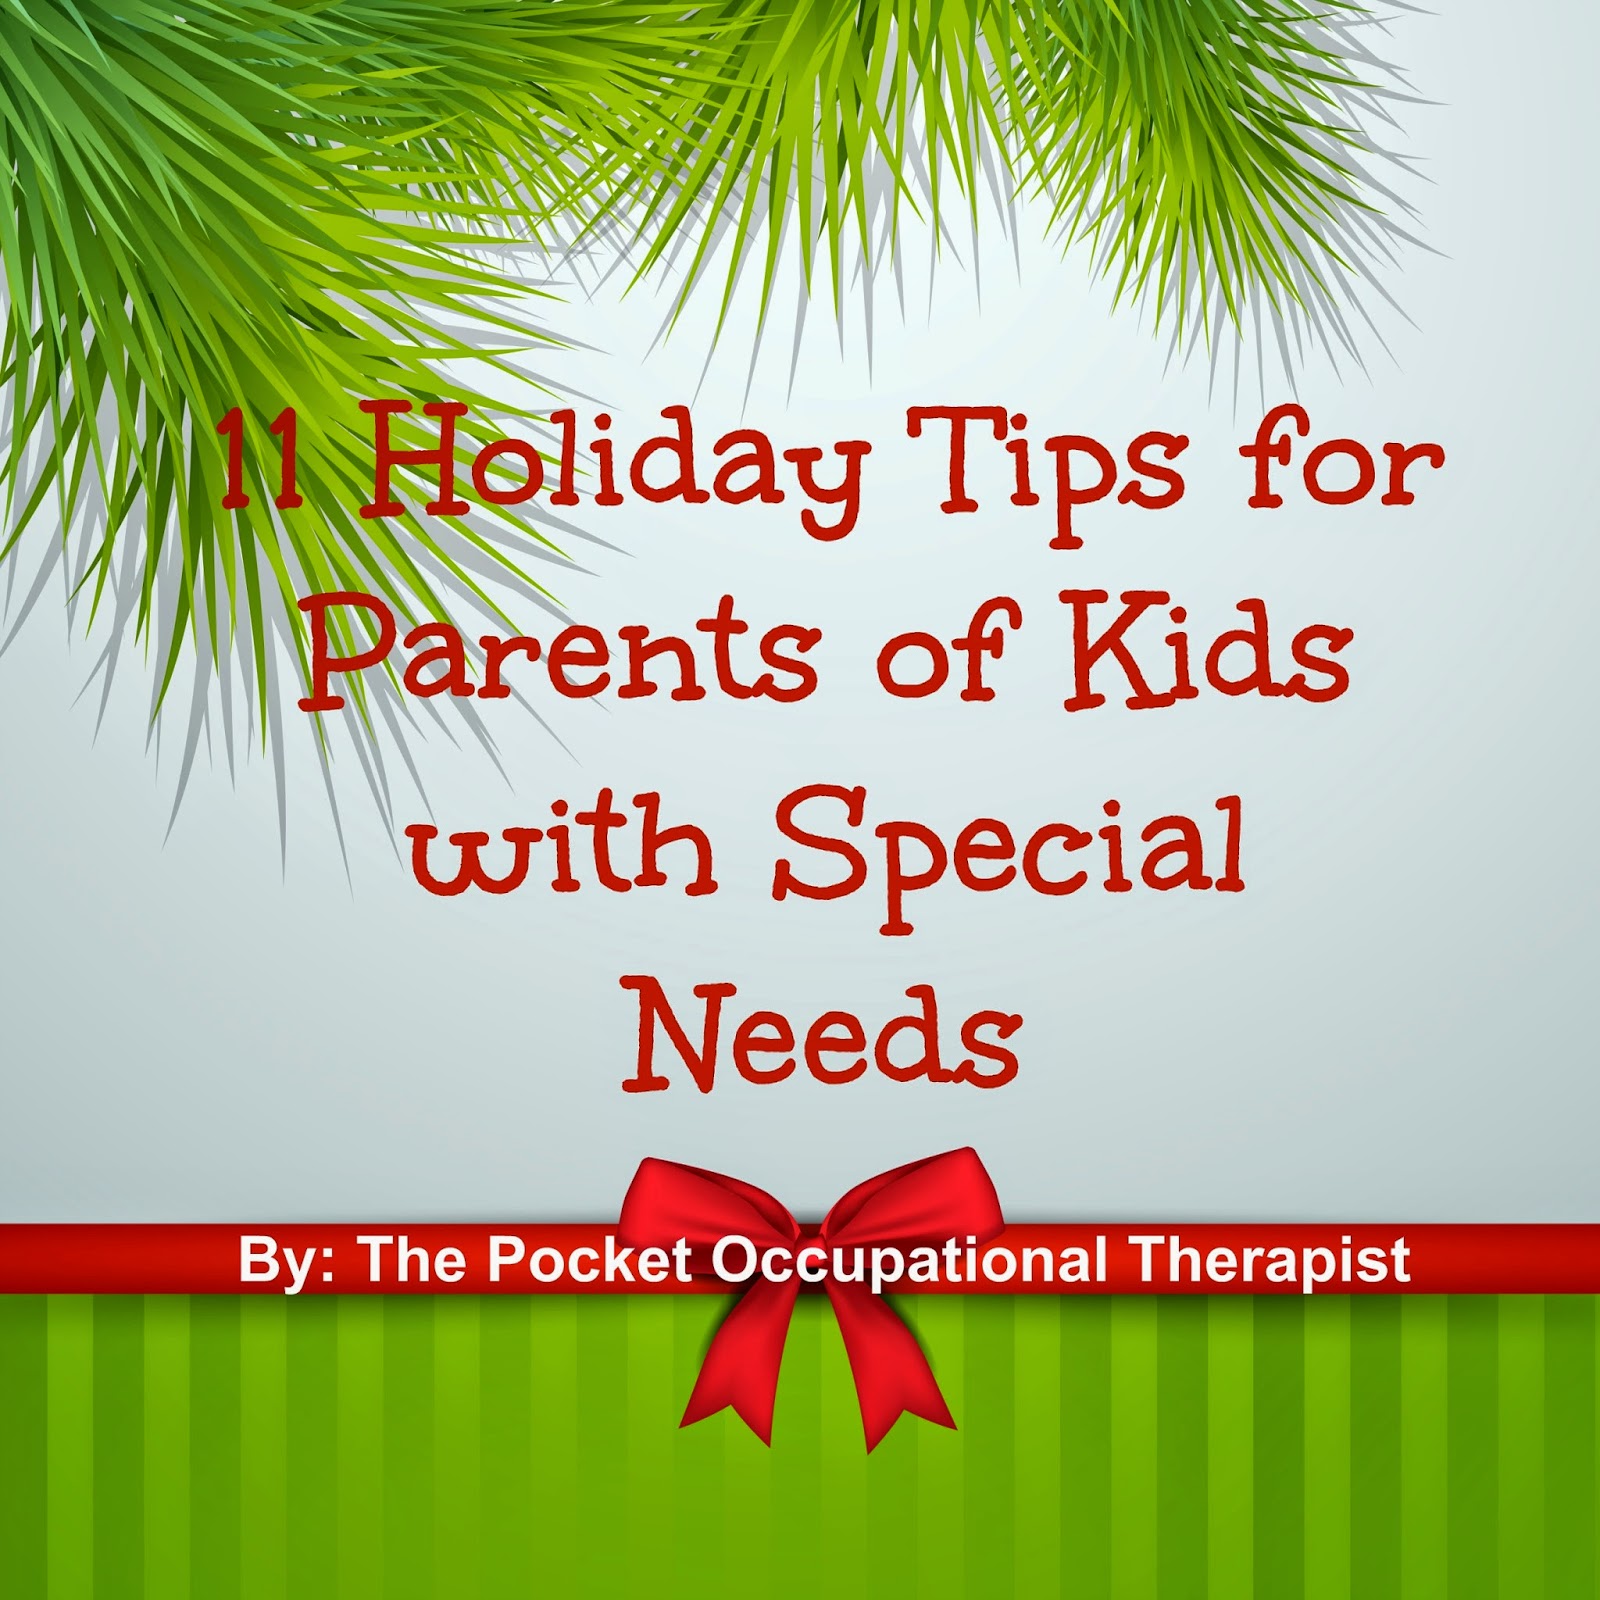 http://thepocketot.blogspot.com/2014/11/11-holiday-tips-for-parents-of-kids.html